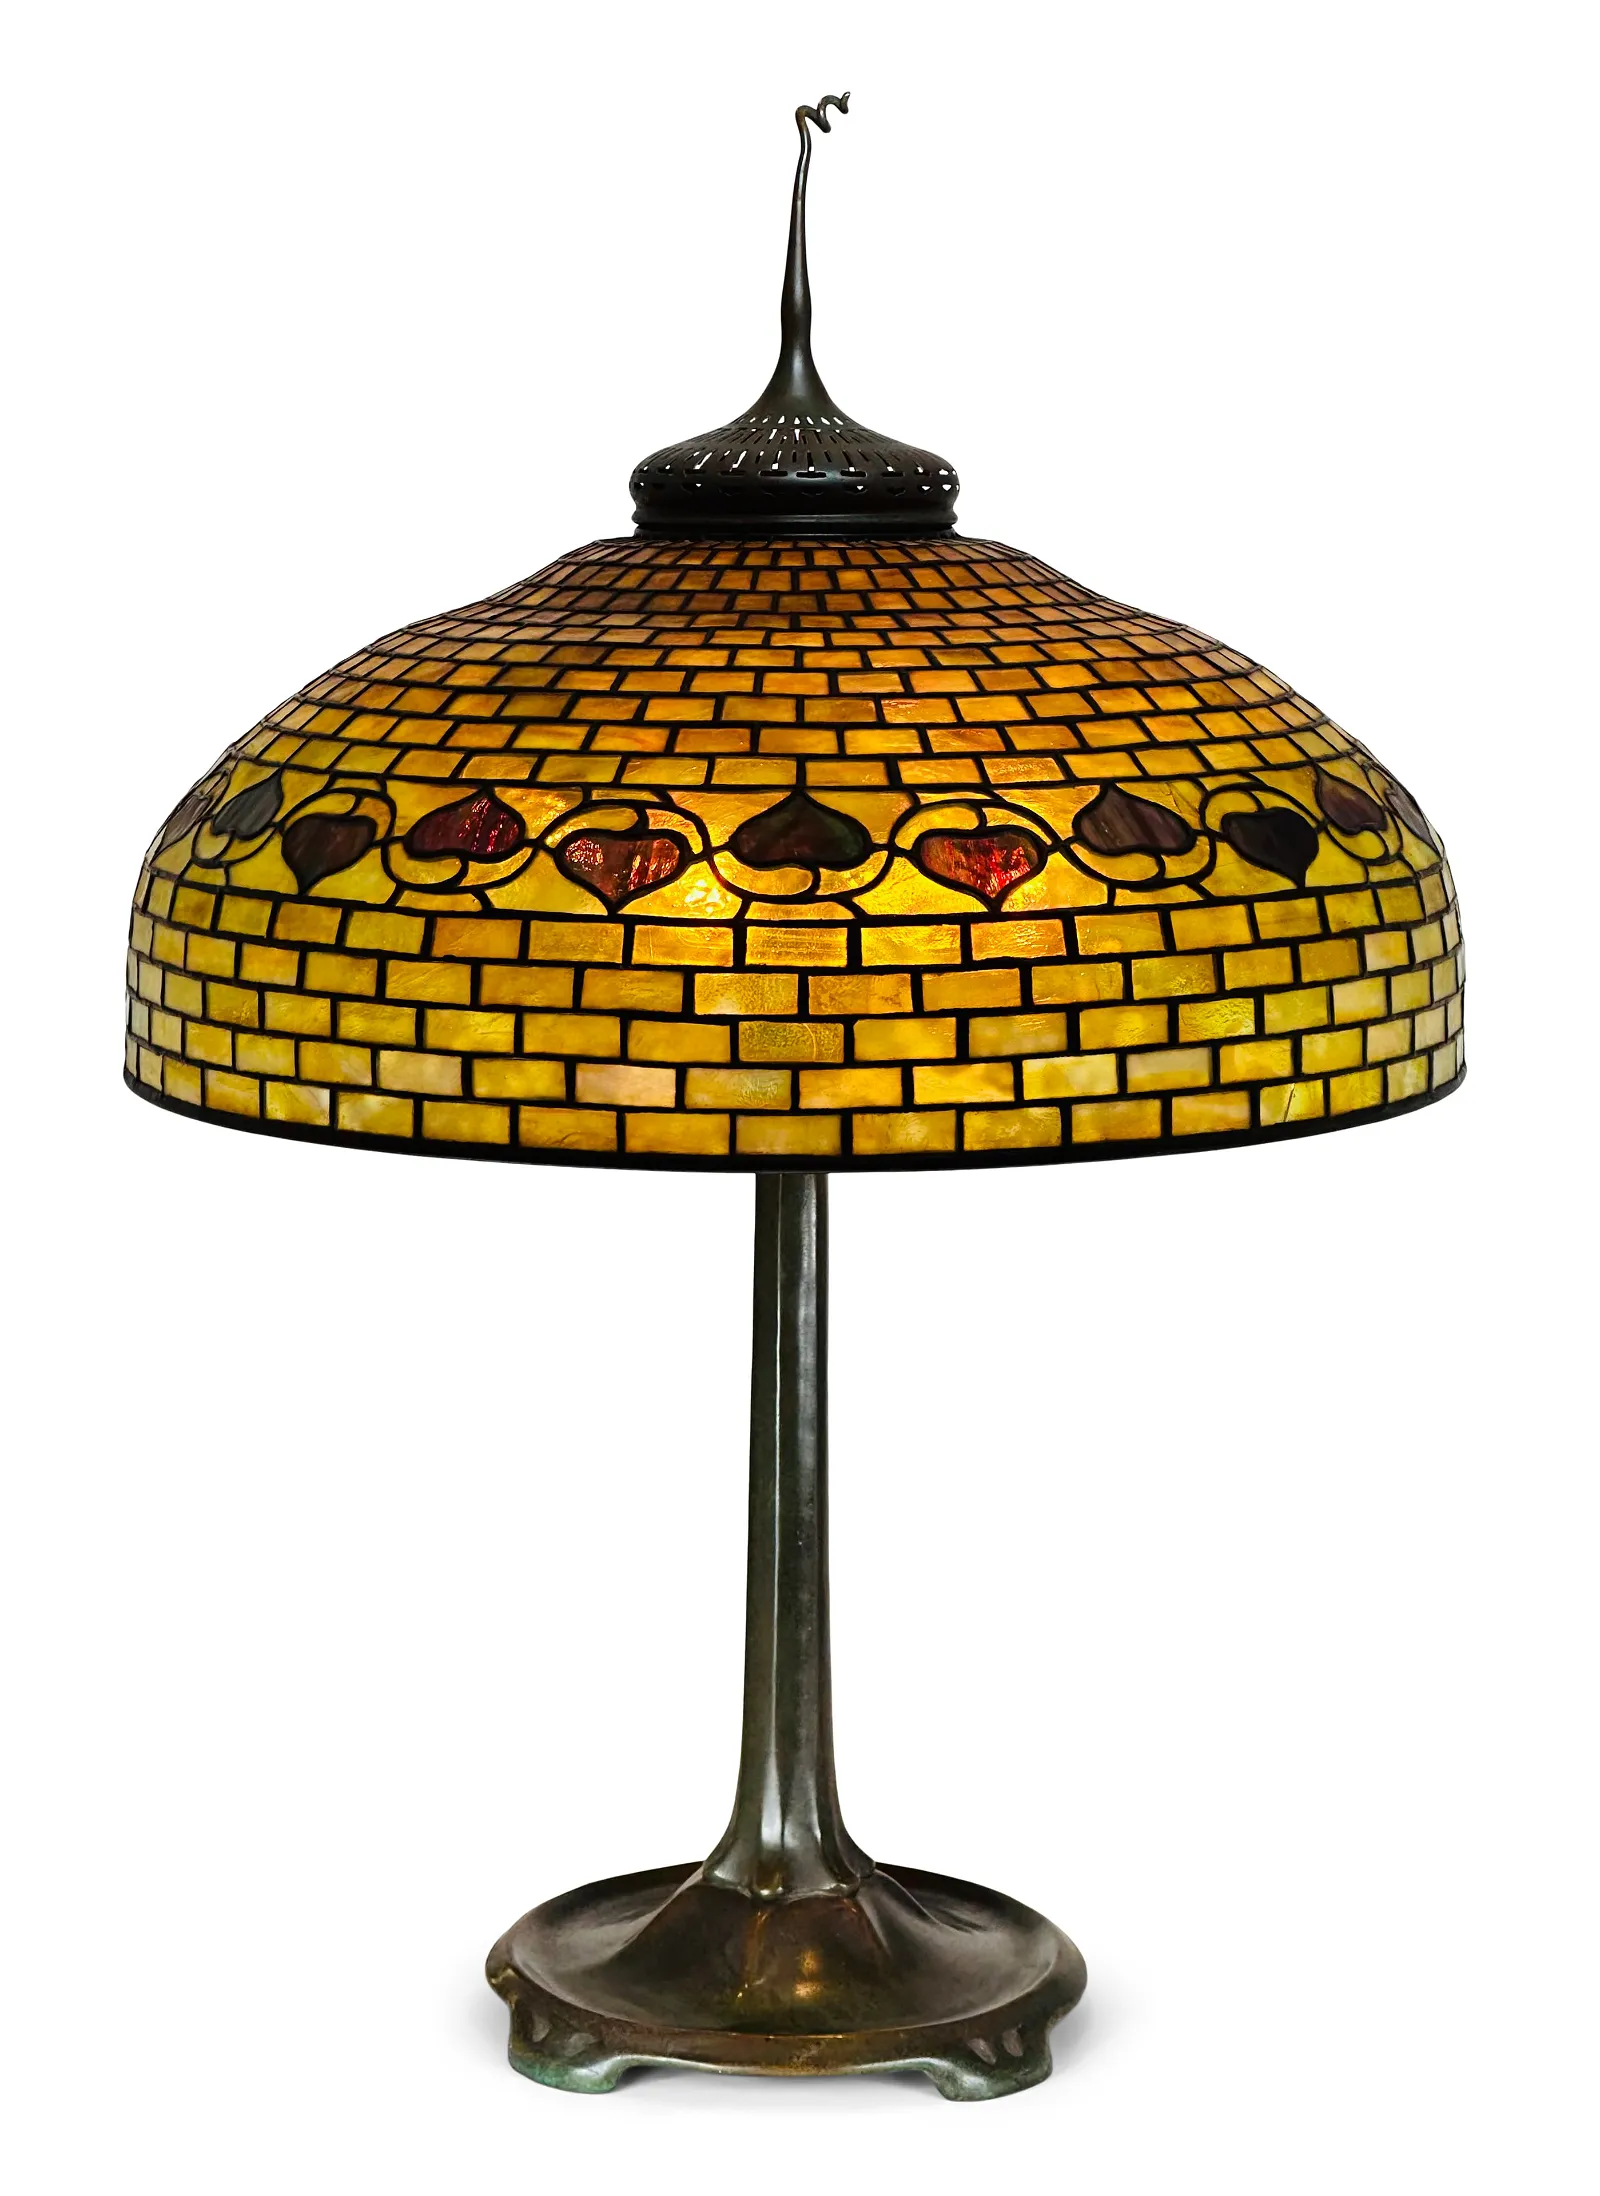 Tiffany Studios lamps turned in bright performances at Fontaine&#8217;s Fine &#038; Decorative Arts sale